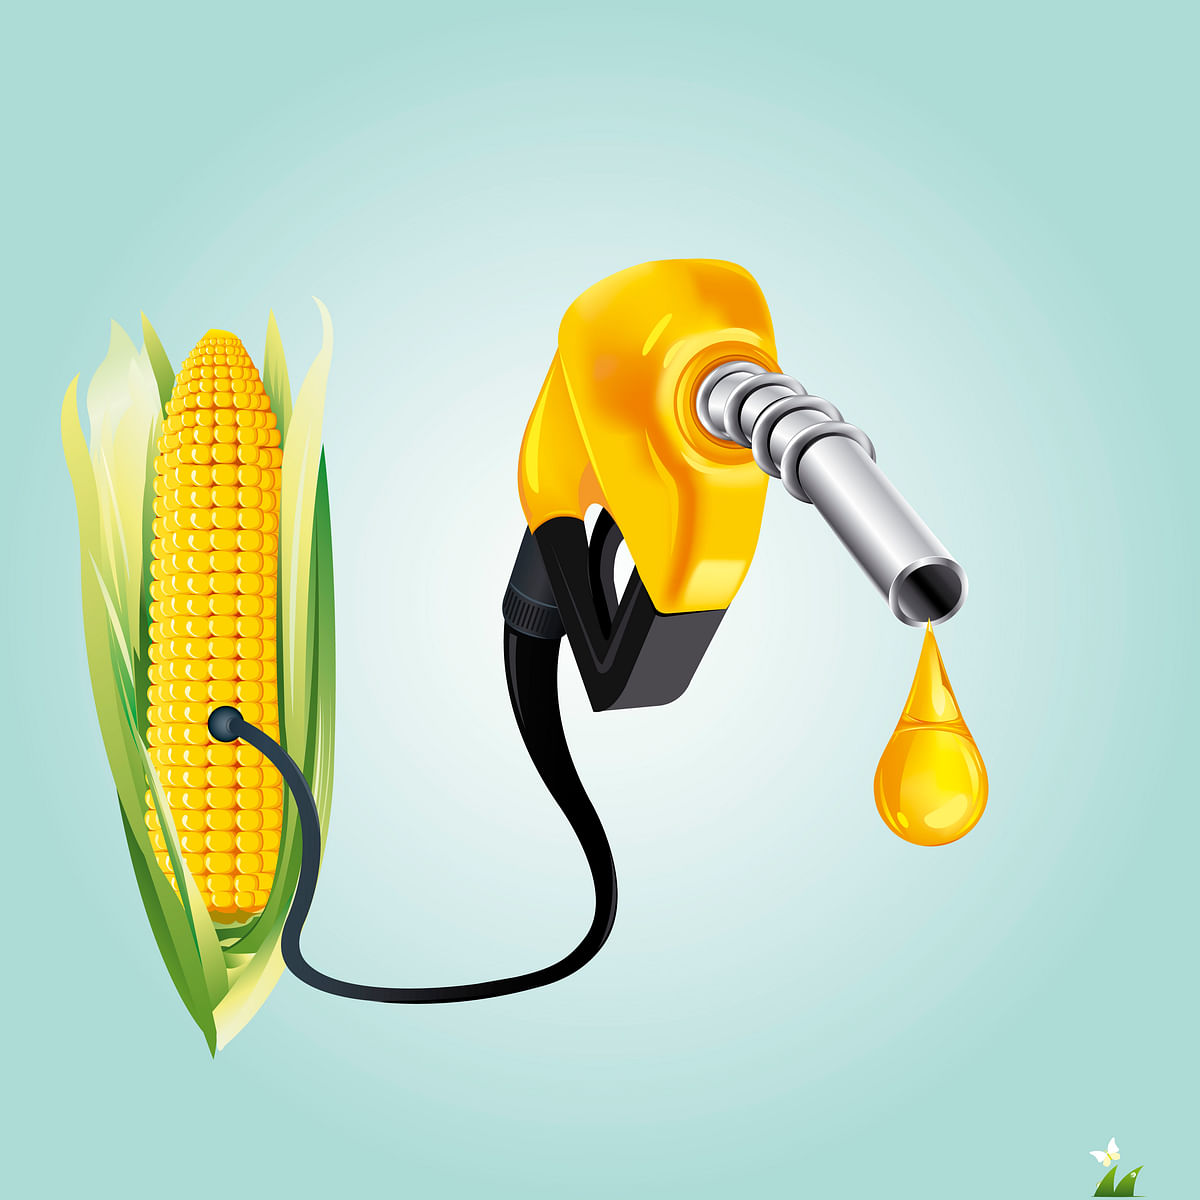  Focus on biofuels has increased with worries about pollution, climate change and limited fossil fuel reserves. 